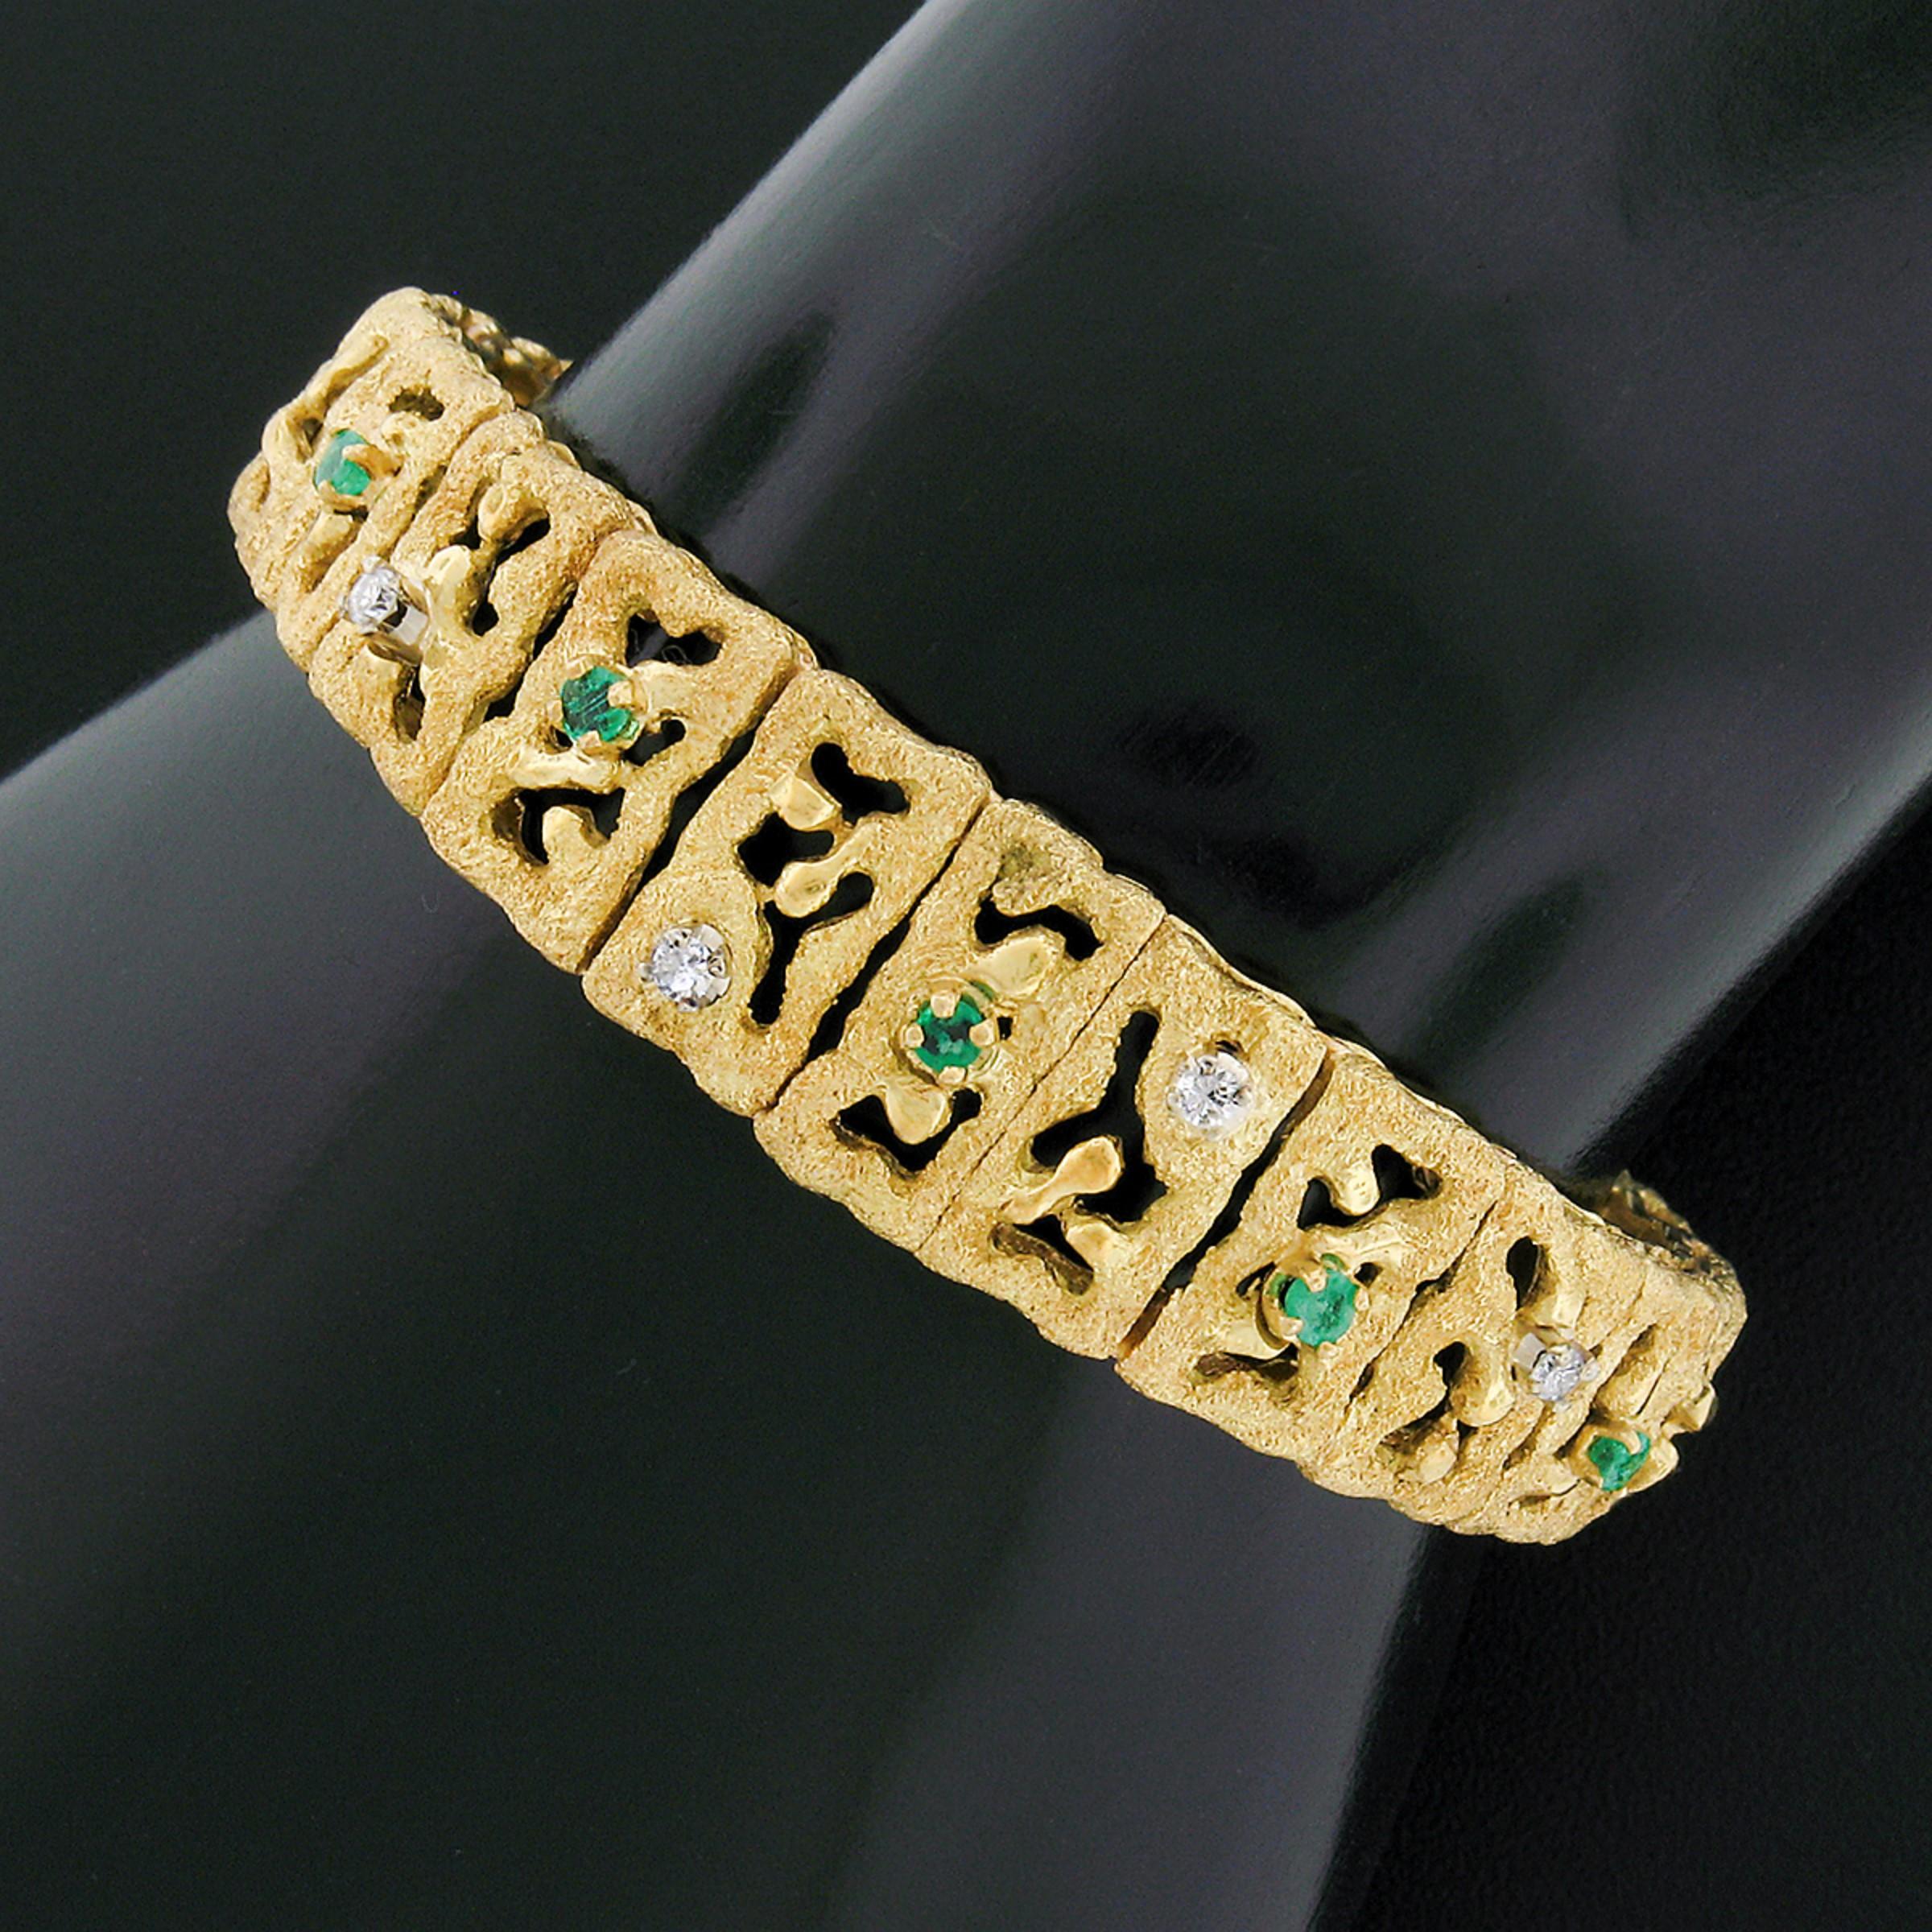 This beautiful statement strap bracelet was crafted in Italy from solid 18k yellow gold and features fine diamonds and emeralds neatly prong set throughout the center of a unique design. The bracelet displays a wonderful textured finish with open